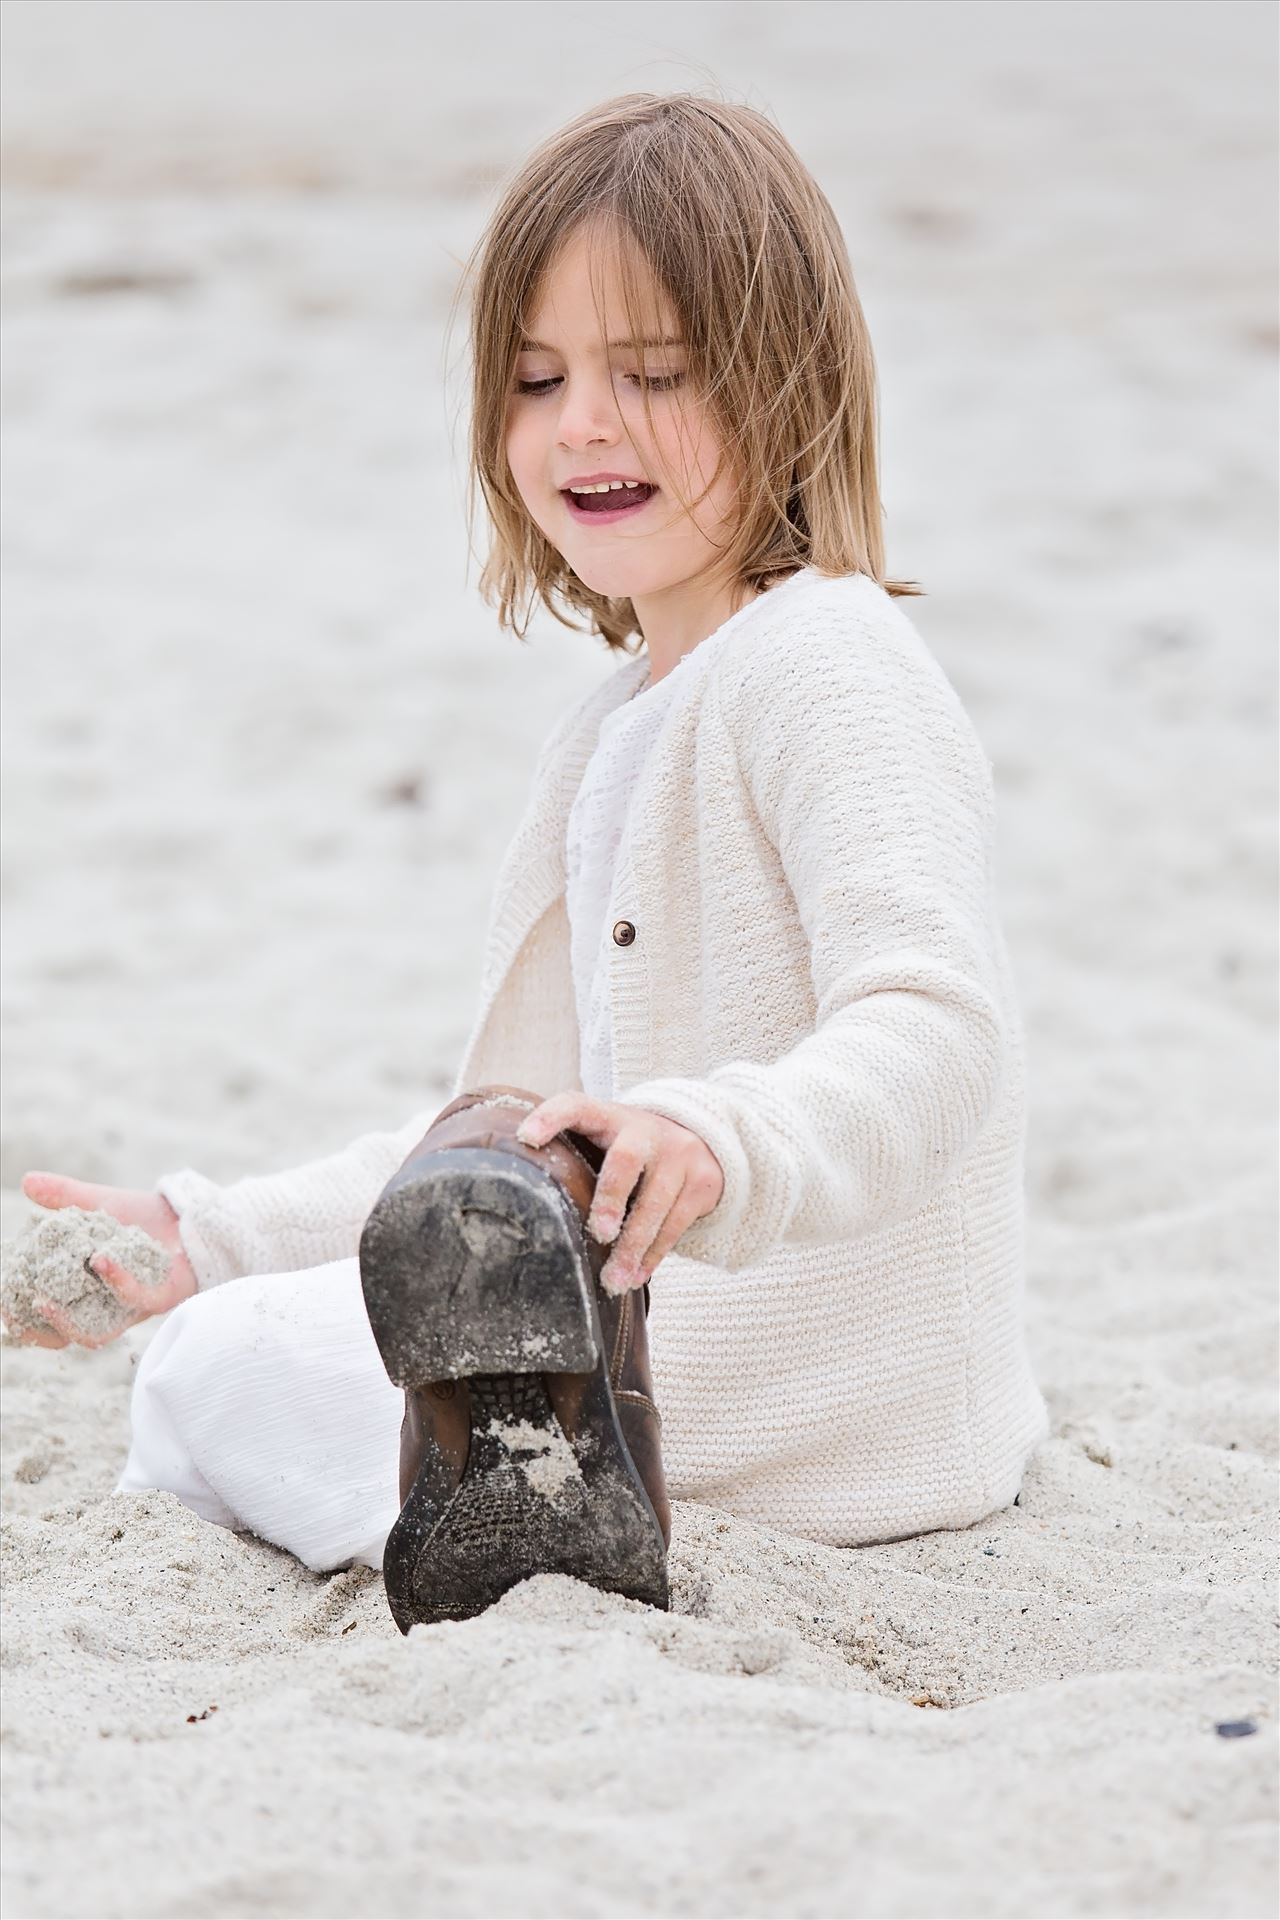 HalfyardFamily 14 Halfyard Family. Family photography beach session. by Maria Angelopoulos Photogrpahy